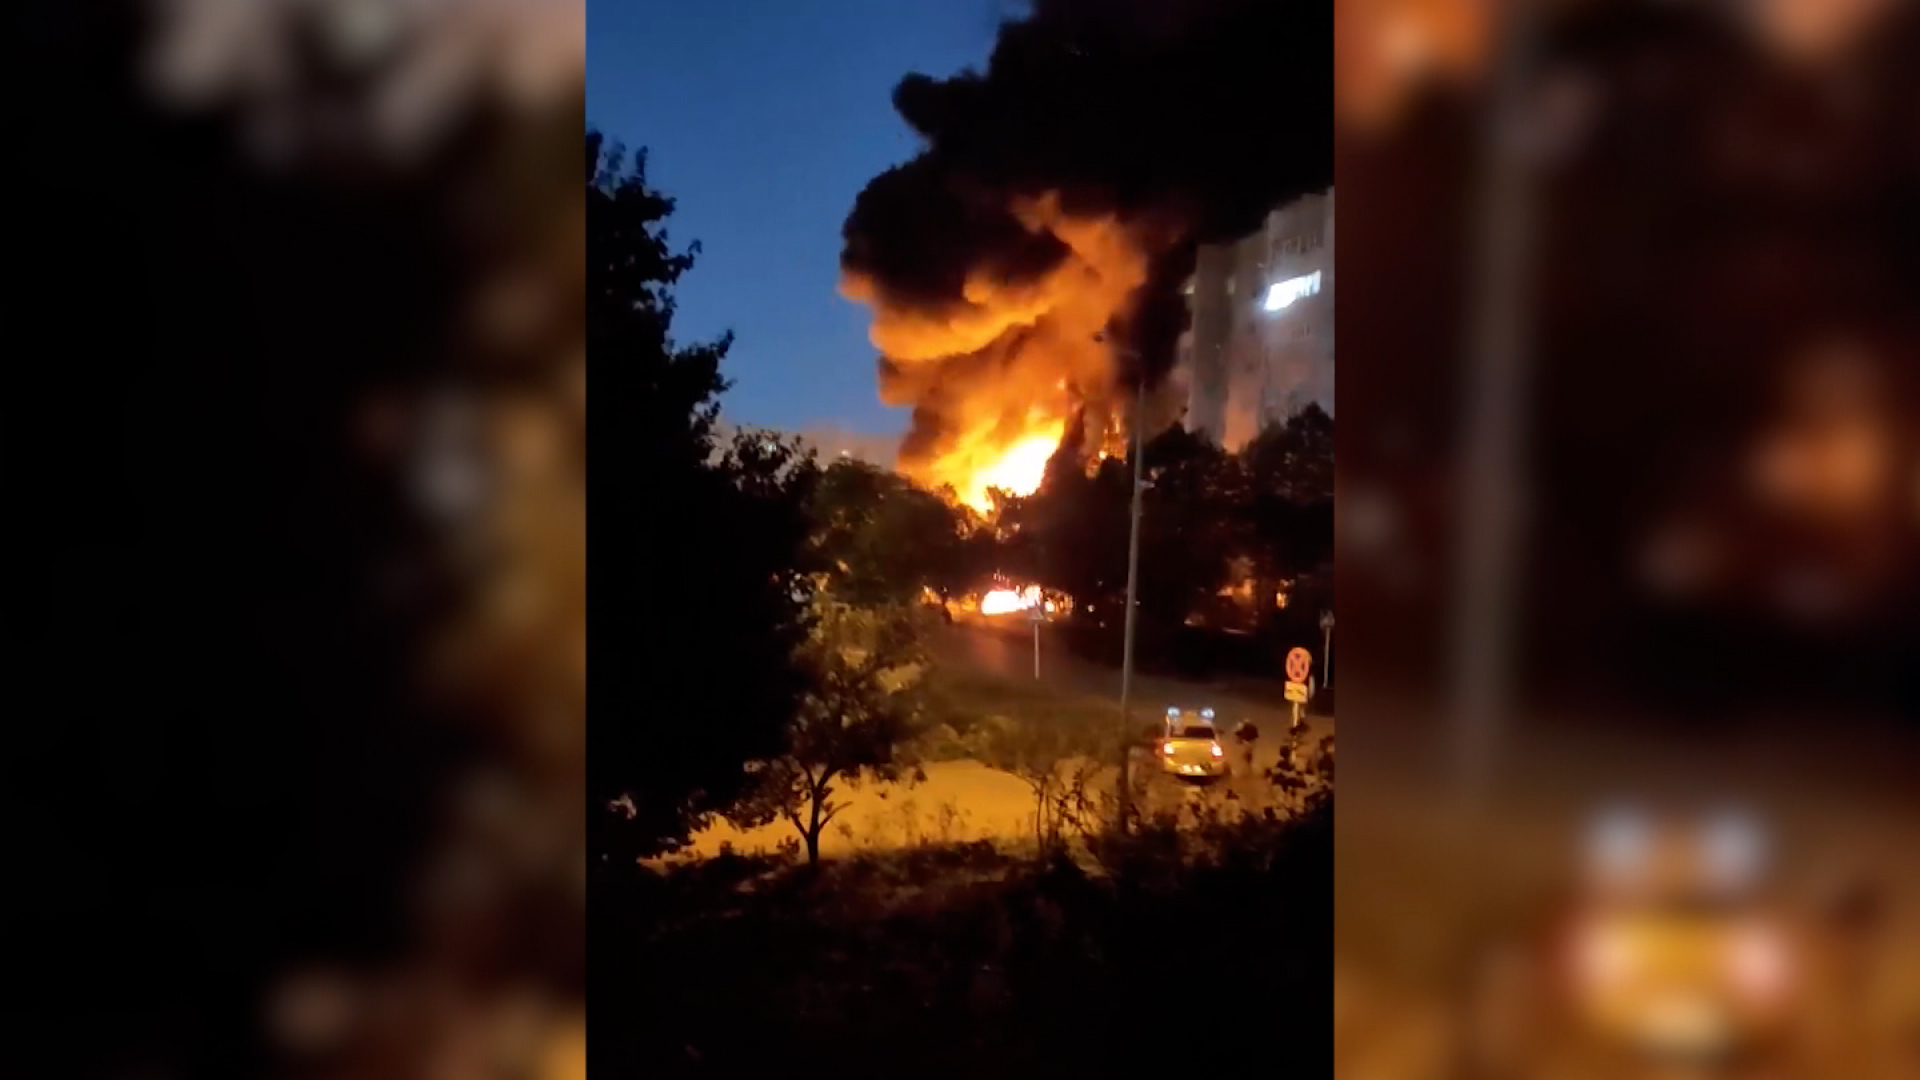 The Russian SU-34 fighter jet crashed into a residential building due to the ignition of one of its...